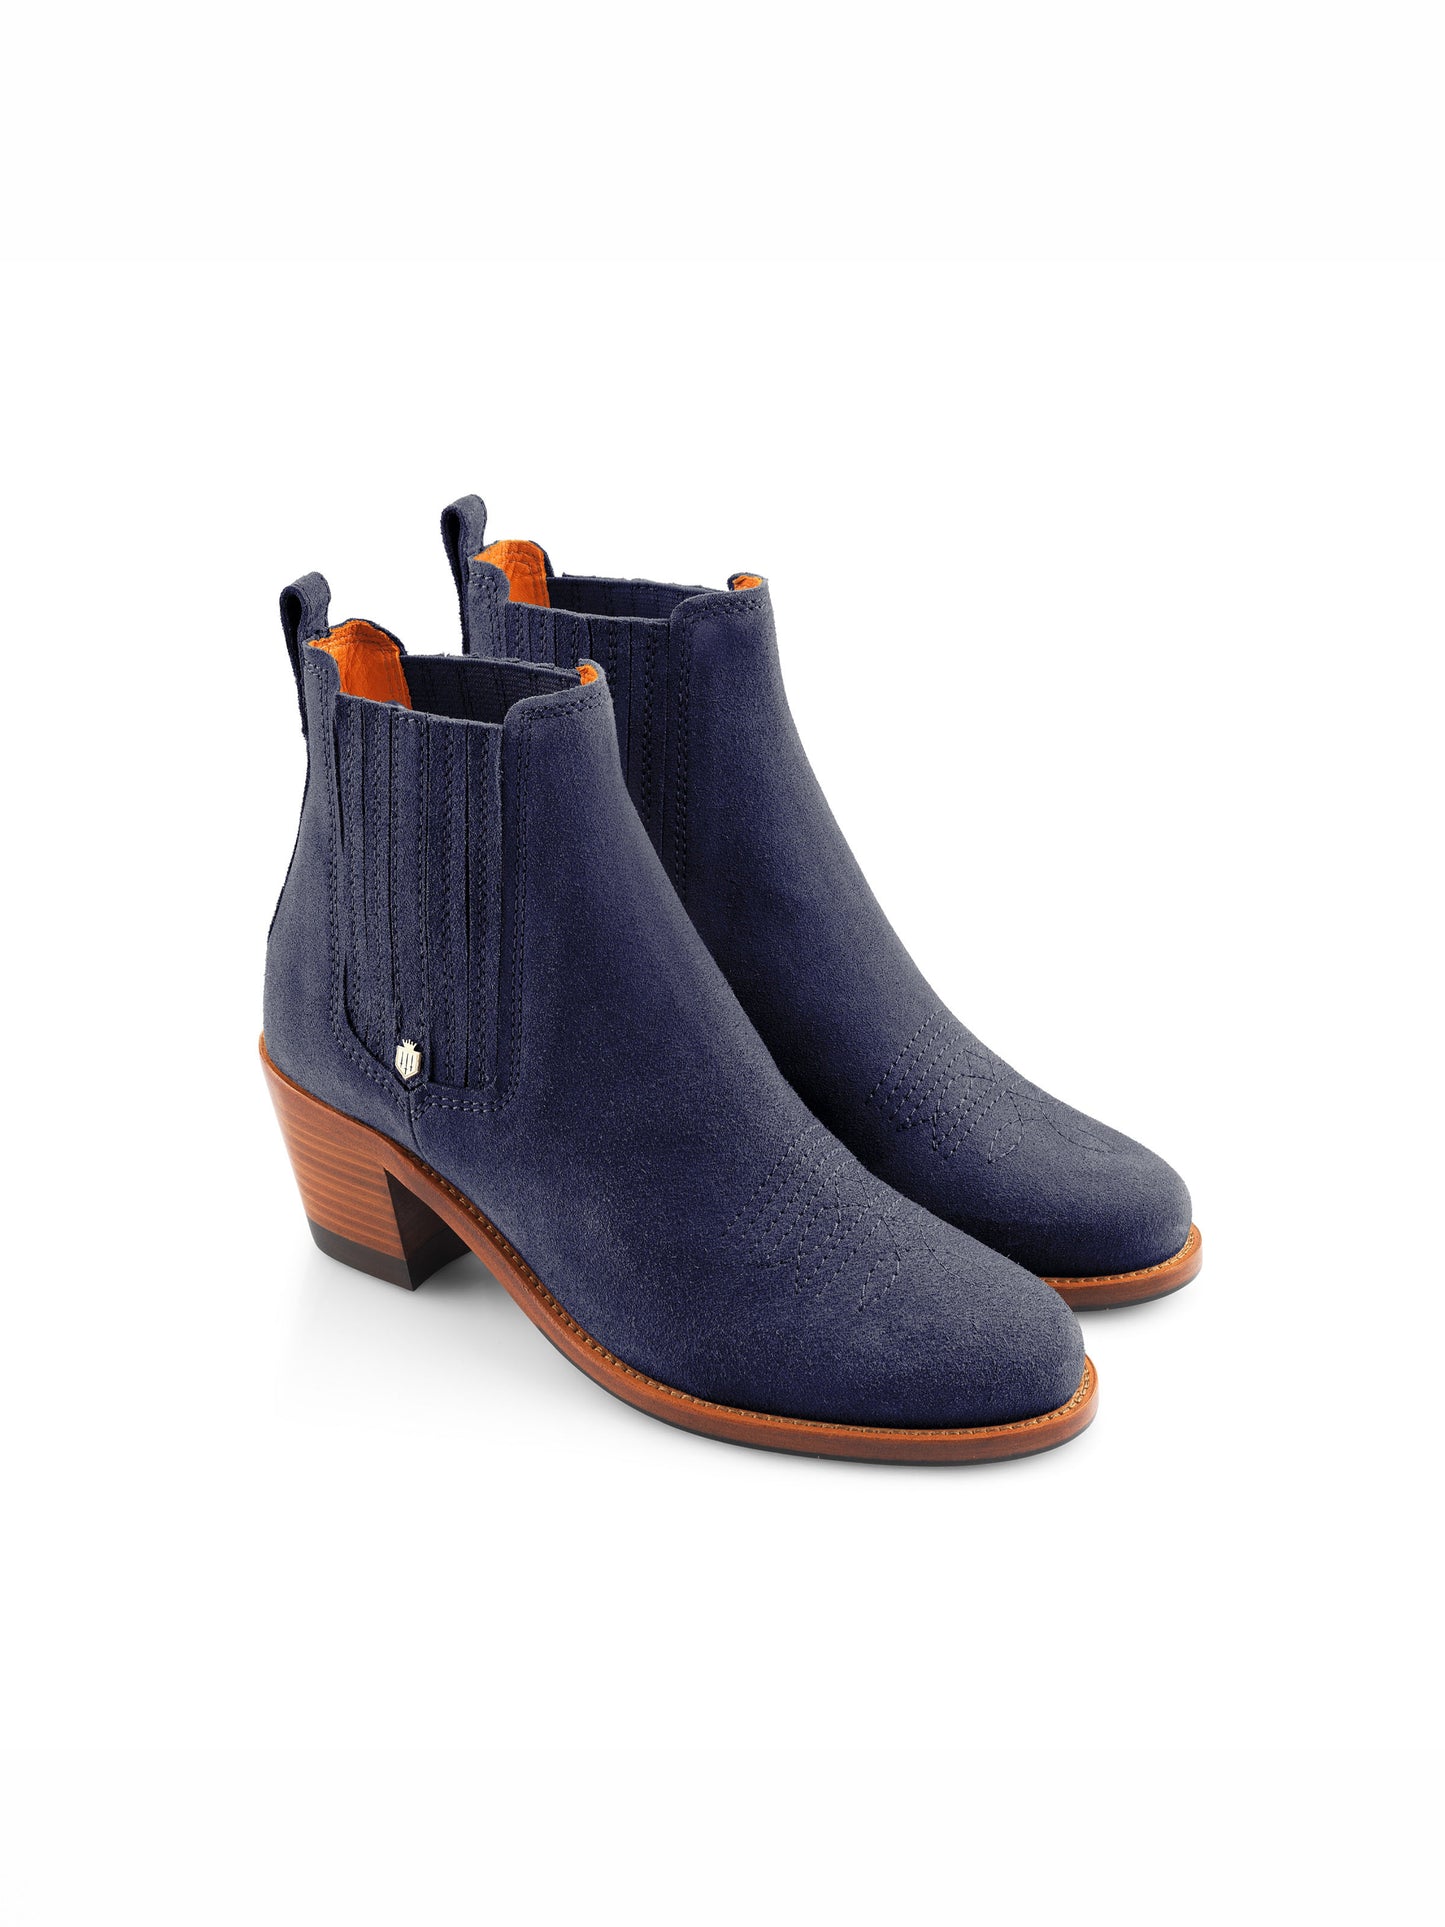 Rockingham Ankle Boot - Ink Suede